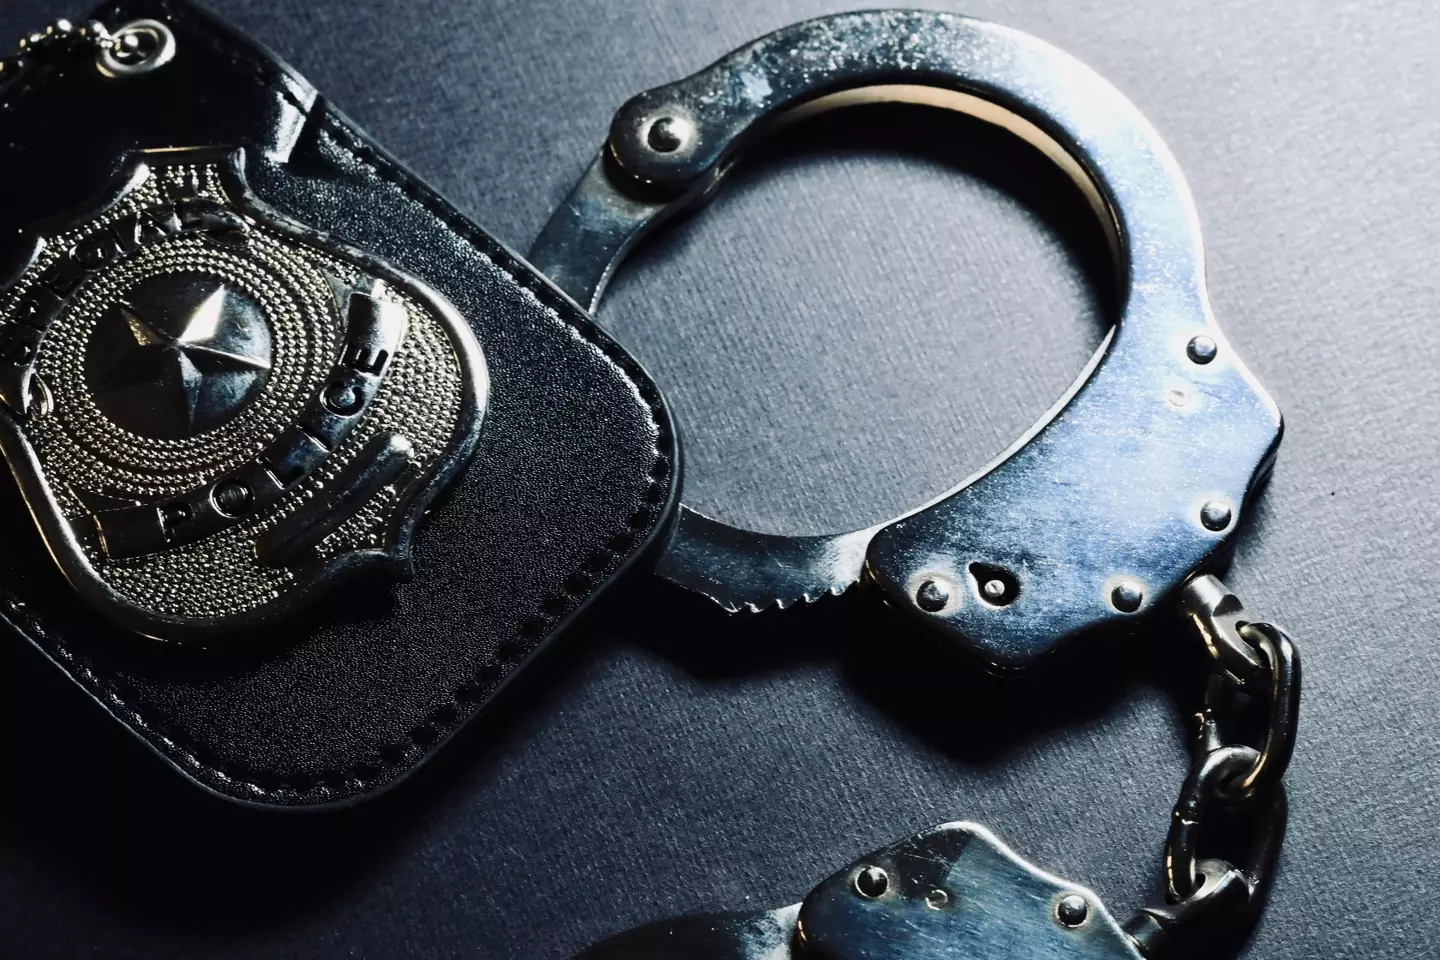 Police handcuffs and badge.